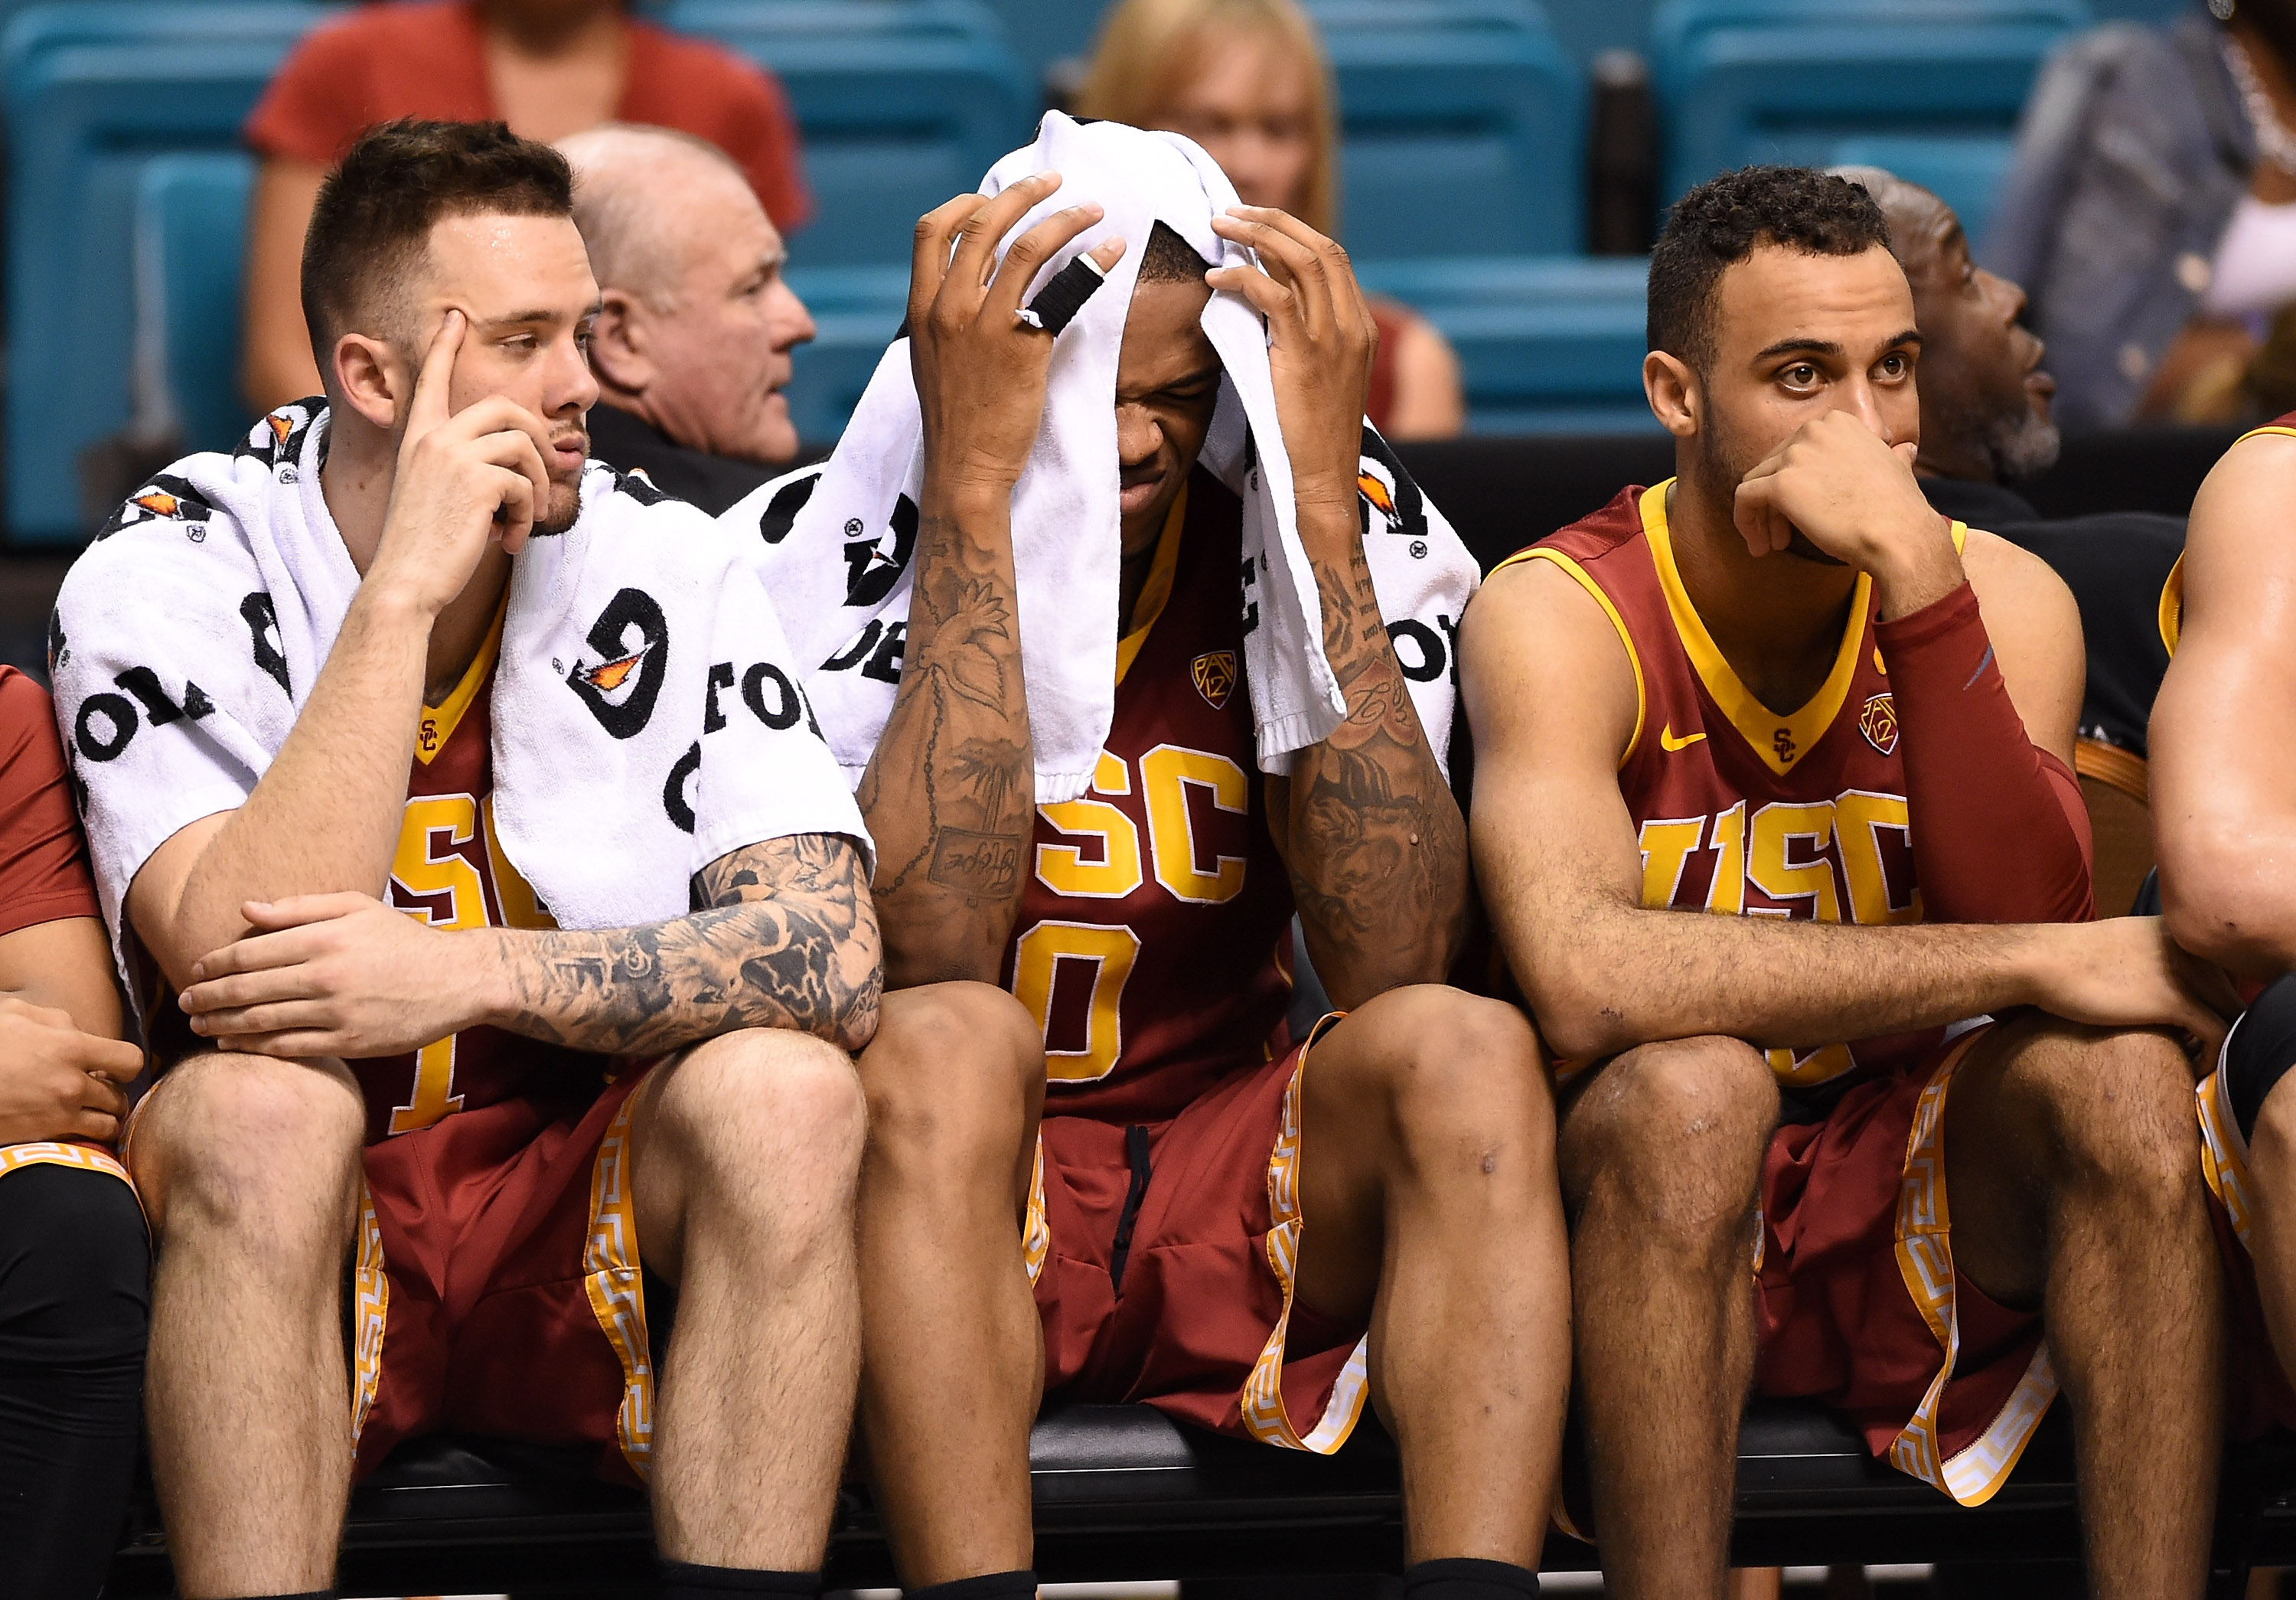 LAS VEGAS, NV - MARCH 12:  (L-R) Katin Reinhardt #1, Darion Clark #0 and Julian Jacobs #12 of the USC Trojans react on the bench late in their 96-70 loss to the UCLA Bruins in a quarterfinal game of the Pac-12 Basketball Tournament at the MGM Grand Garden Arena on March 12, 2015 in Las Vegas, Nevada.  (Photo by Ethan Miller/Getty Images)